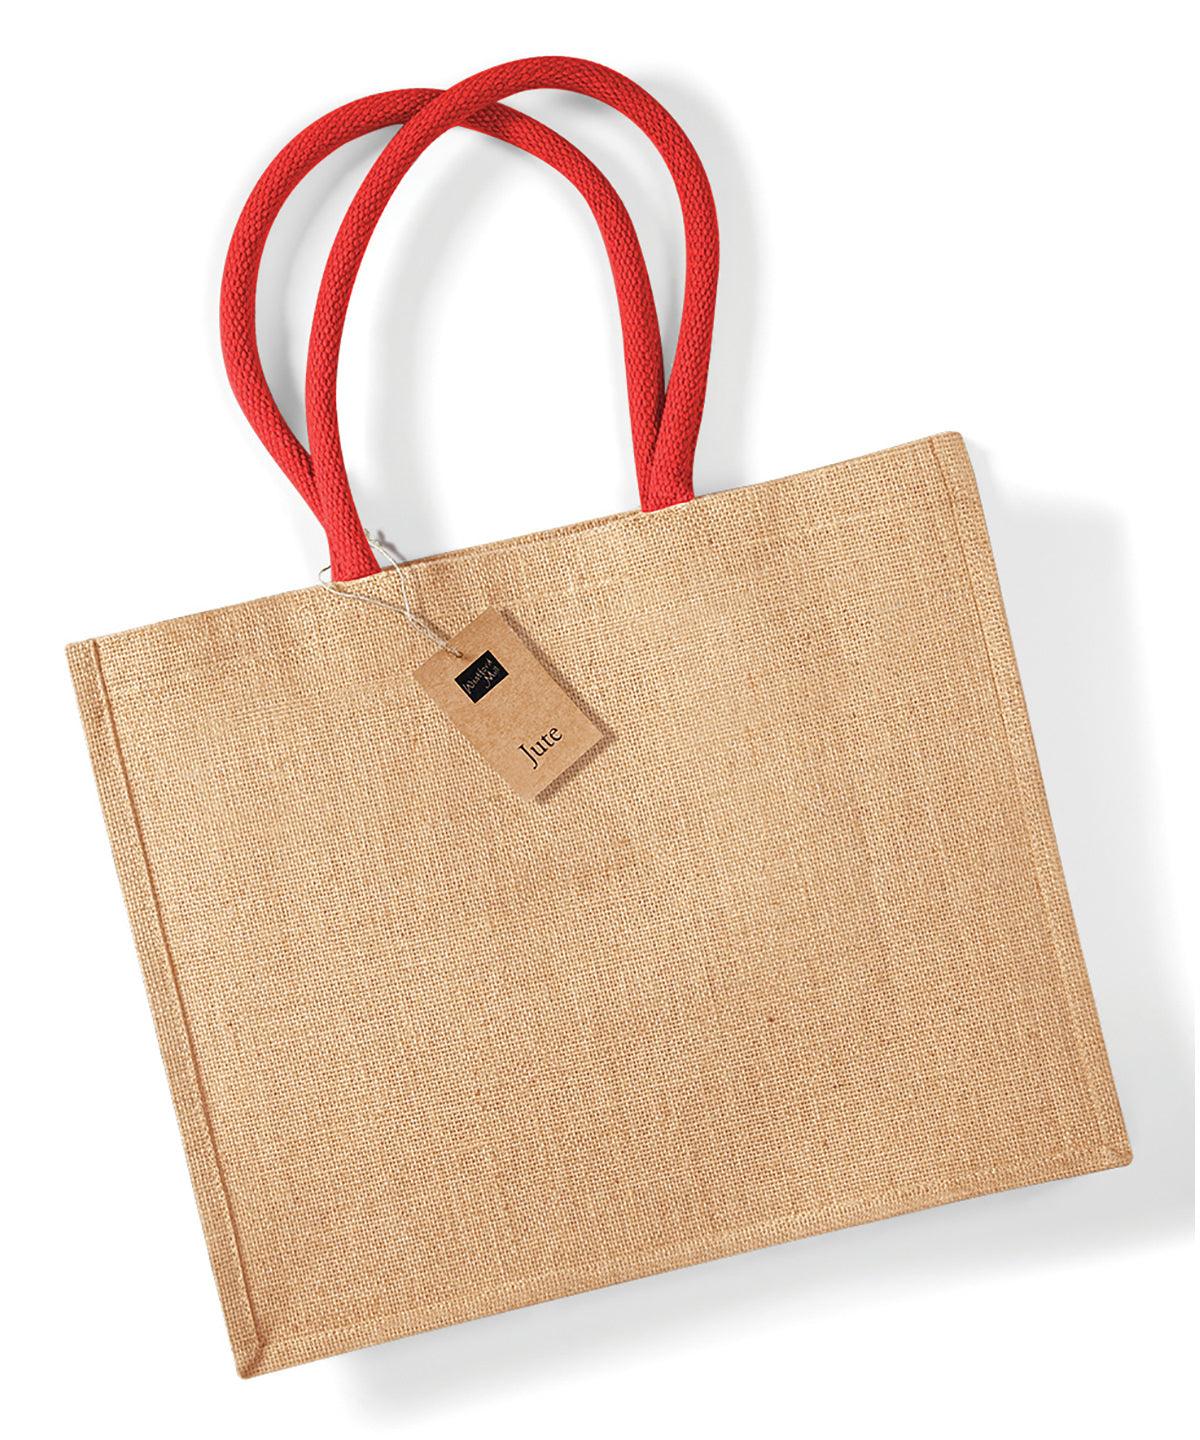 Natural/Bright Red - Jute classic shopper Bags Westford Mill Bags & Luggage, Must Haves Schoolwear Centres